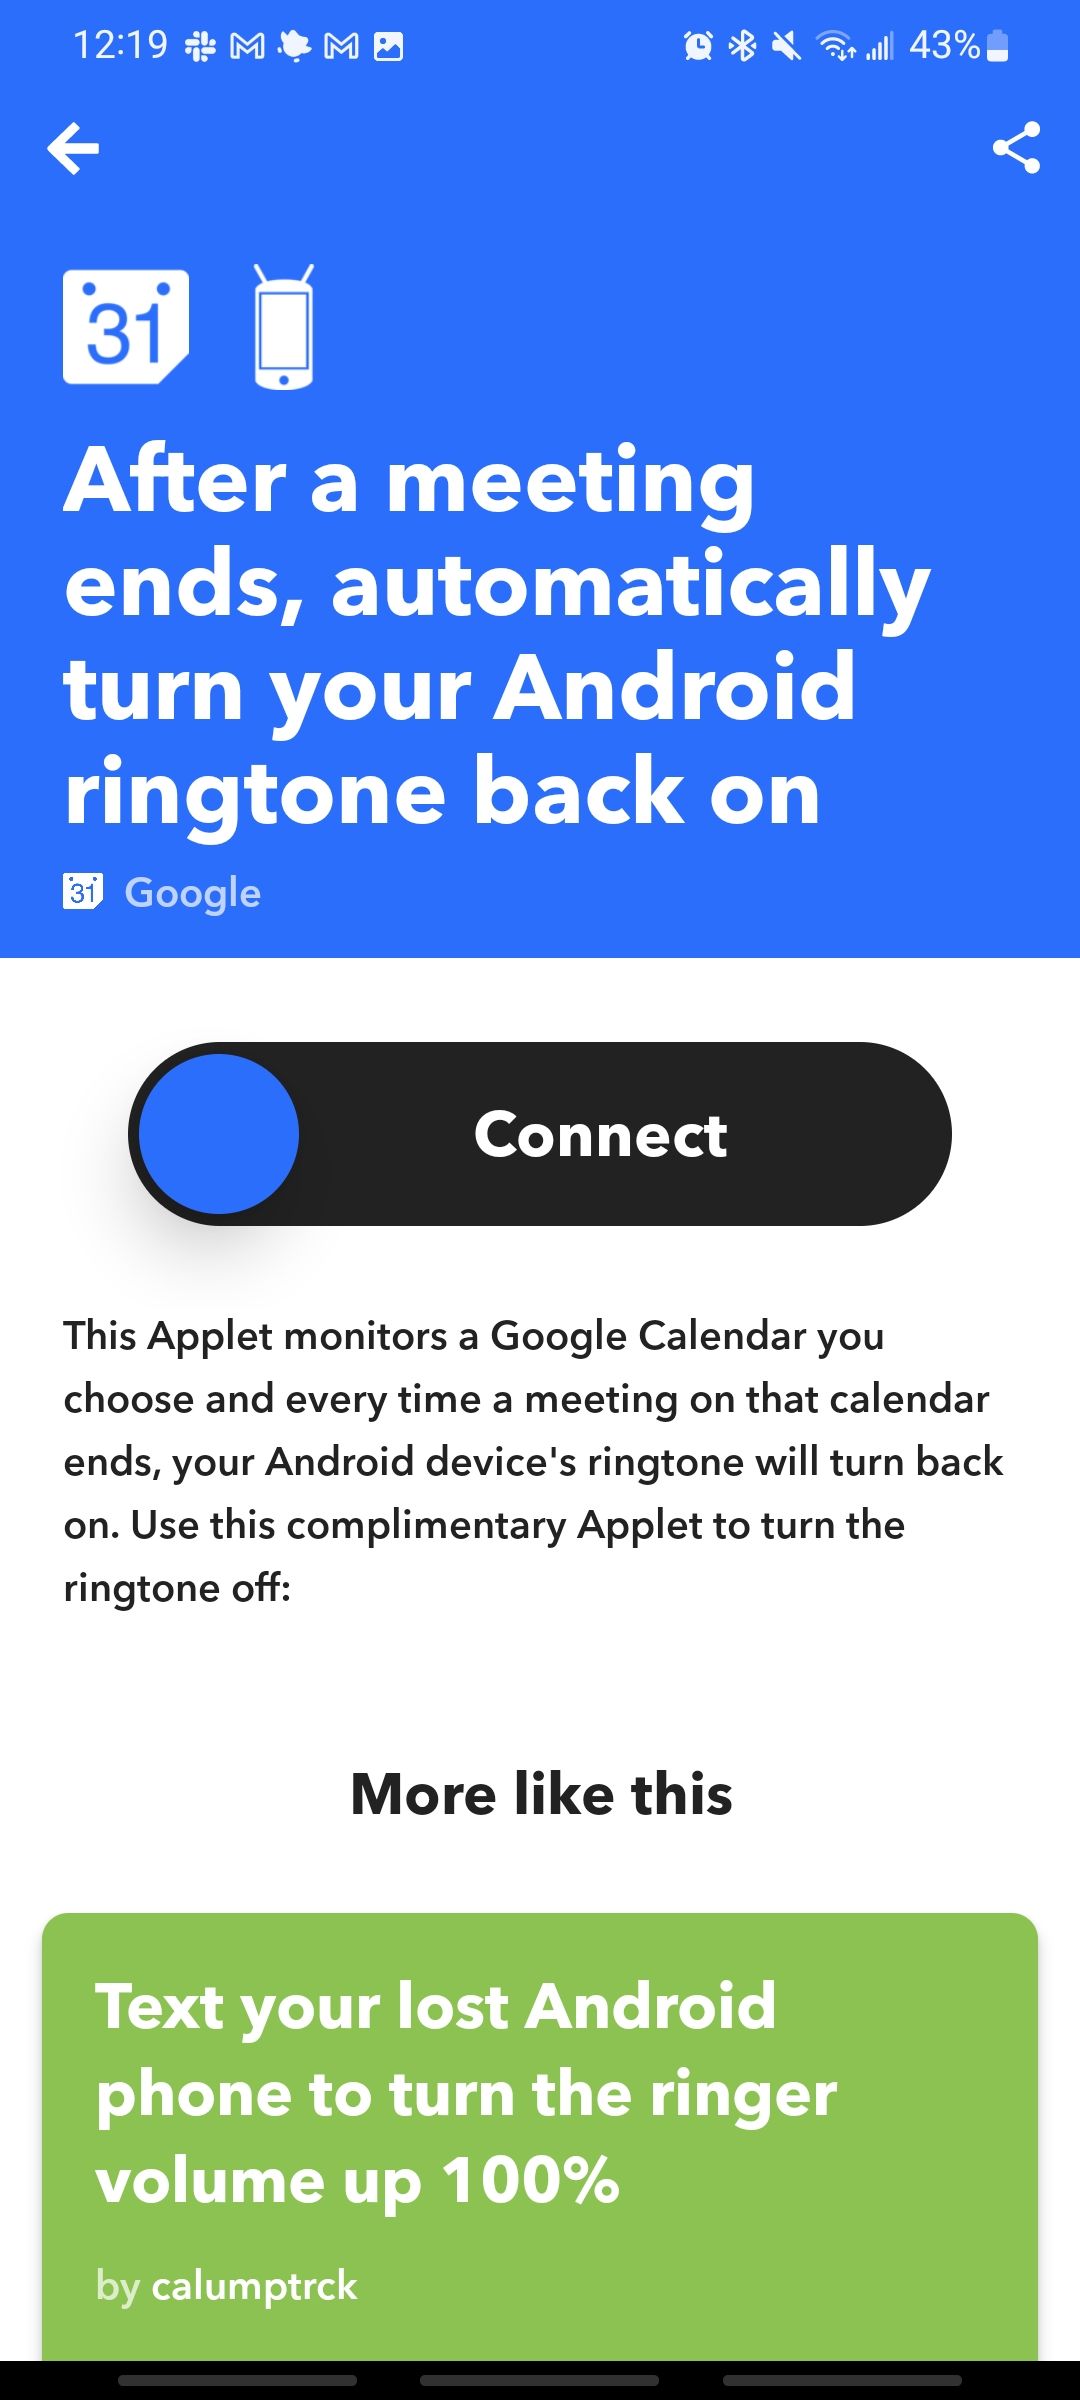 when a meeting ends, your ringer will turn back on via ifttt app